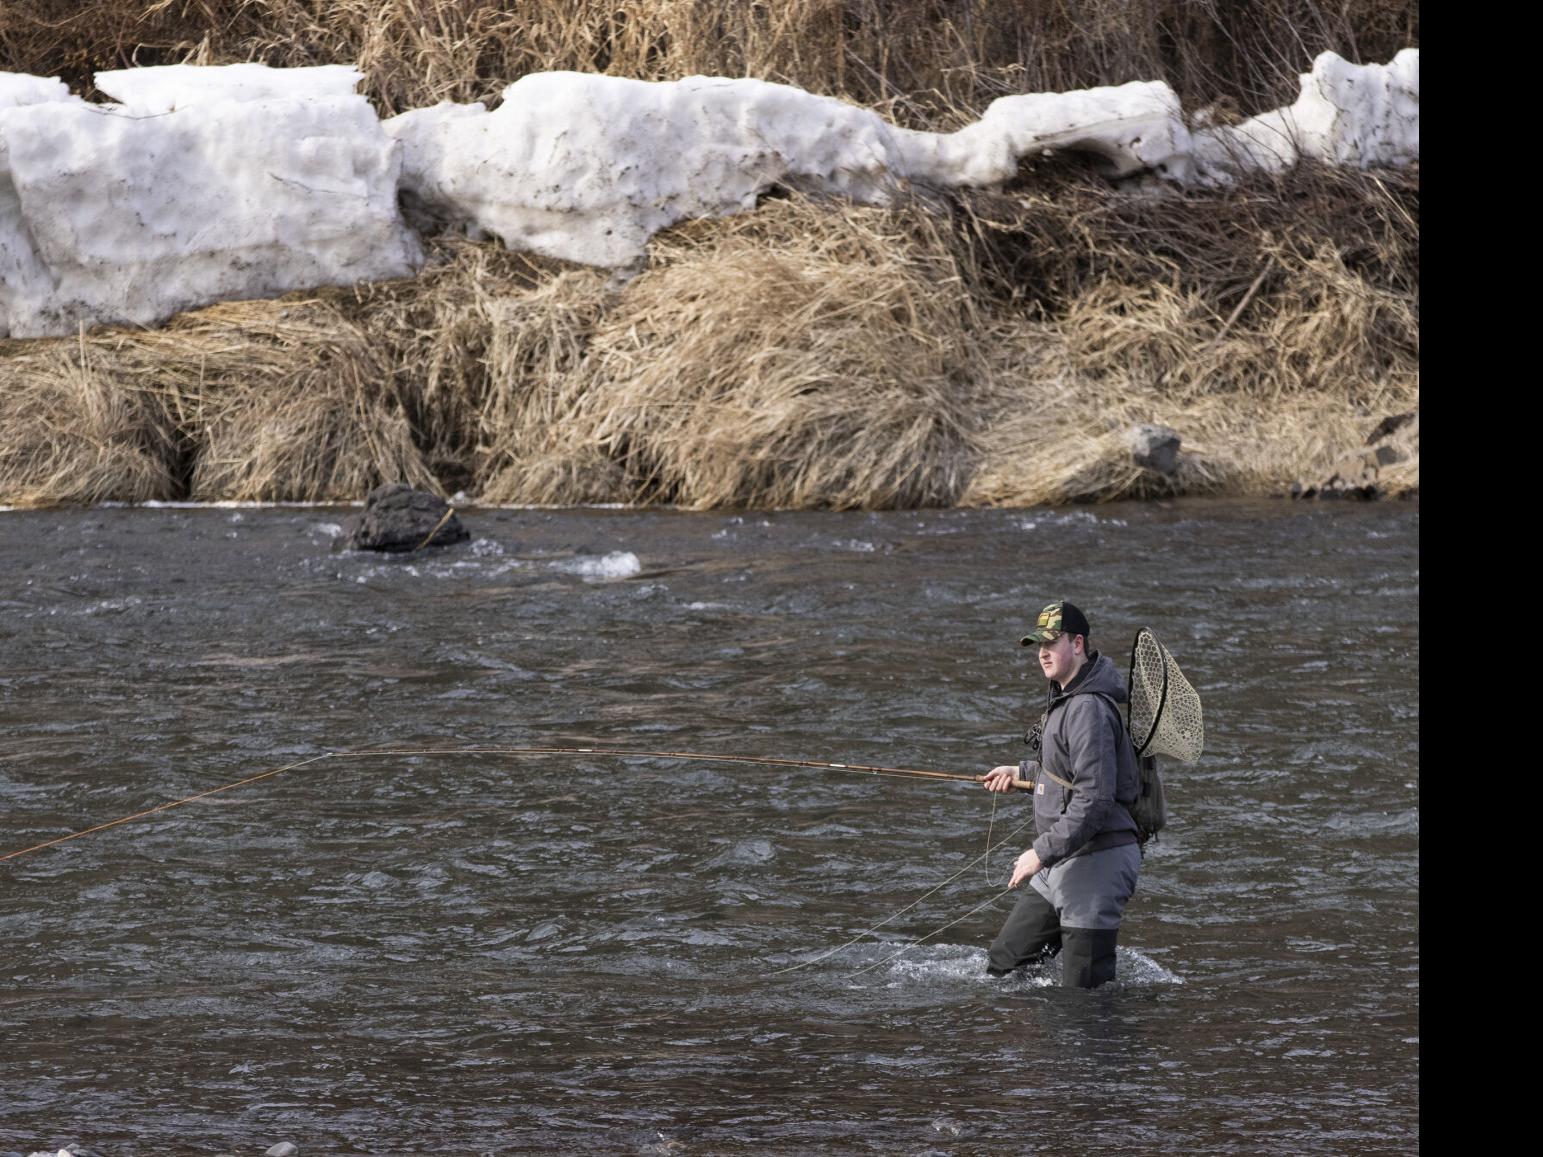 Winter flyfishing offers special challenge in Yakima River Canyon